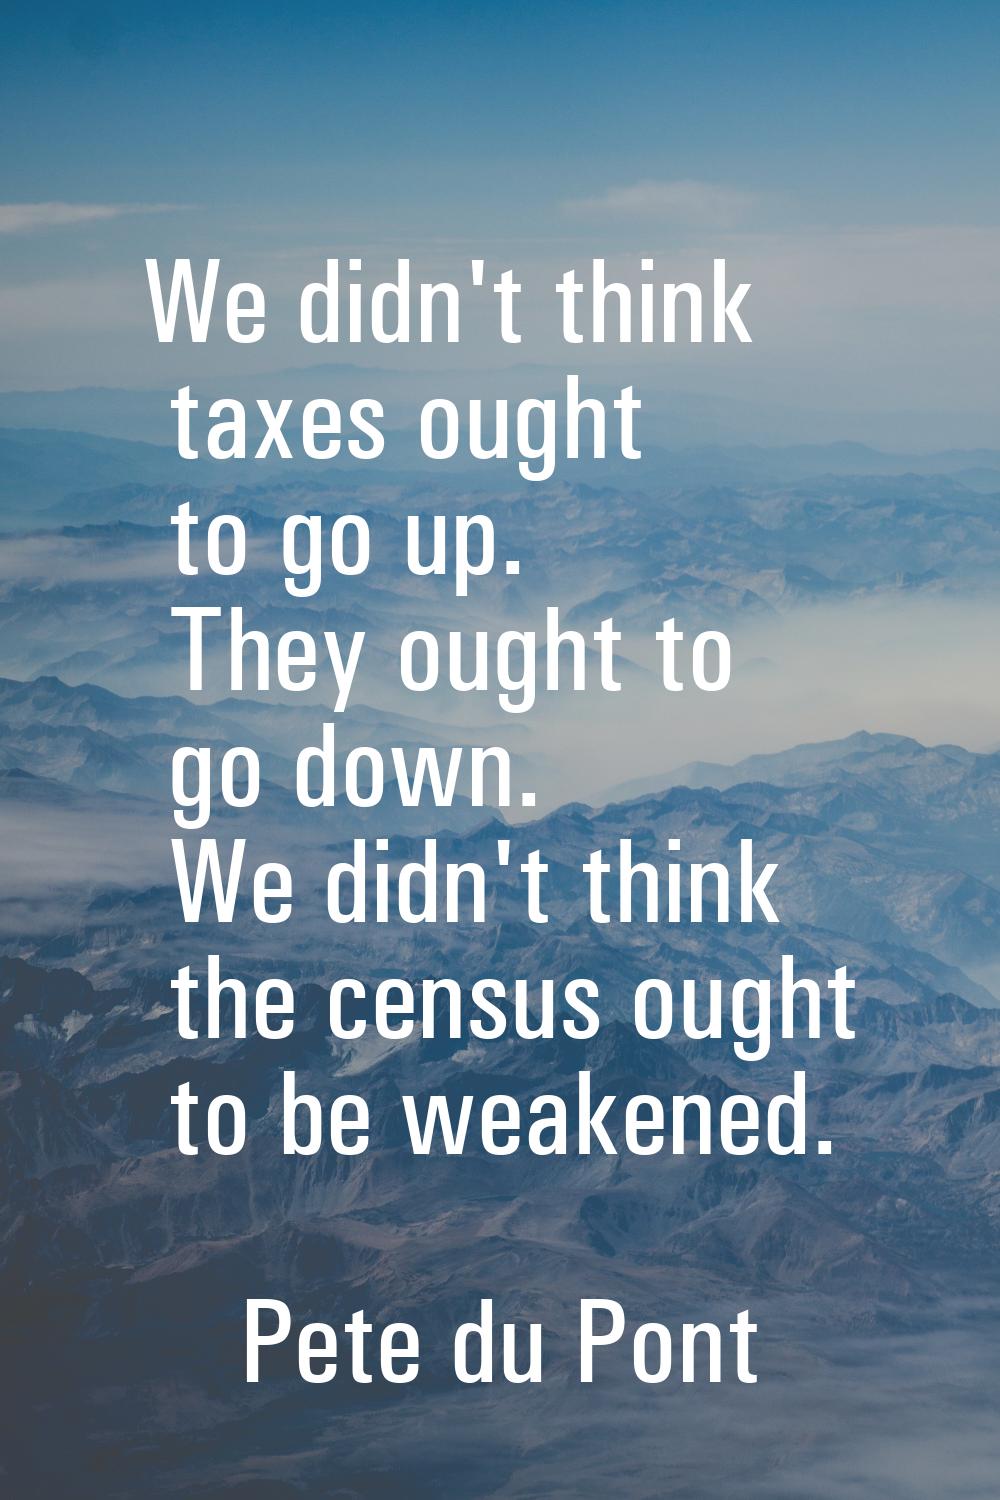 We didn't think taxes ought to go up. They ought to go down. We didn't think the census ought to be